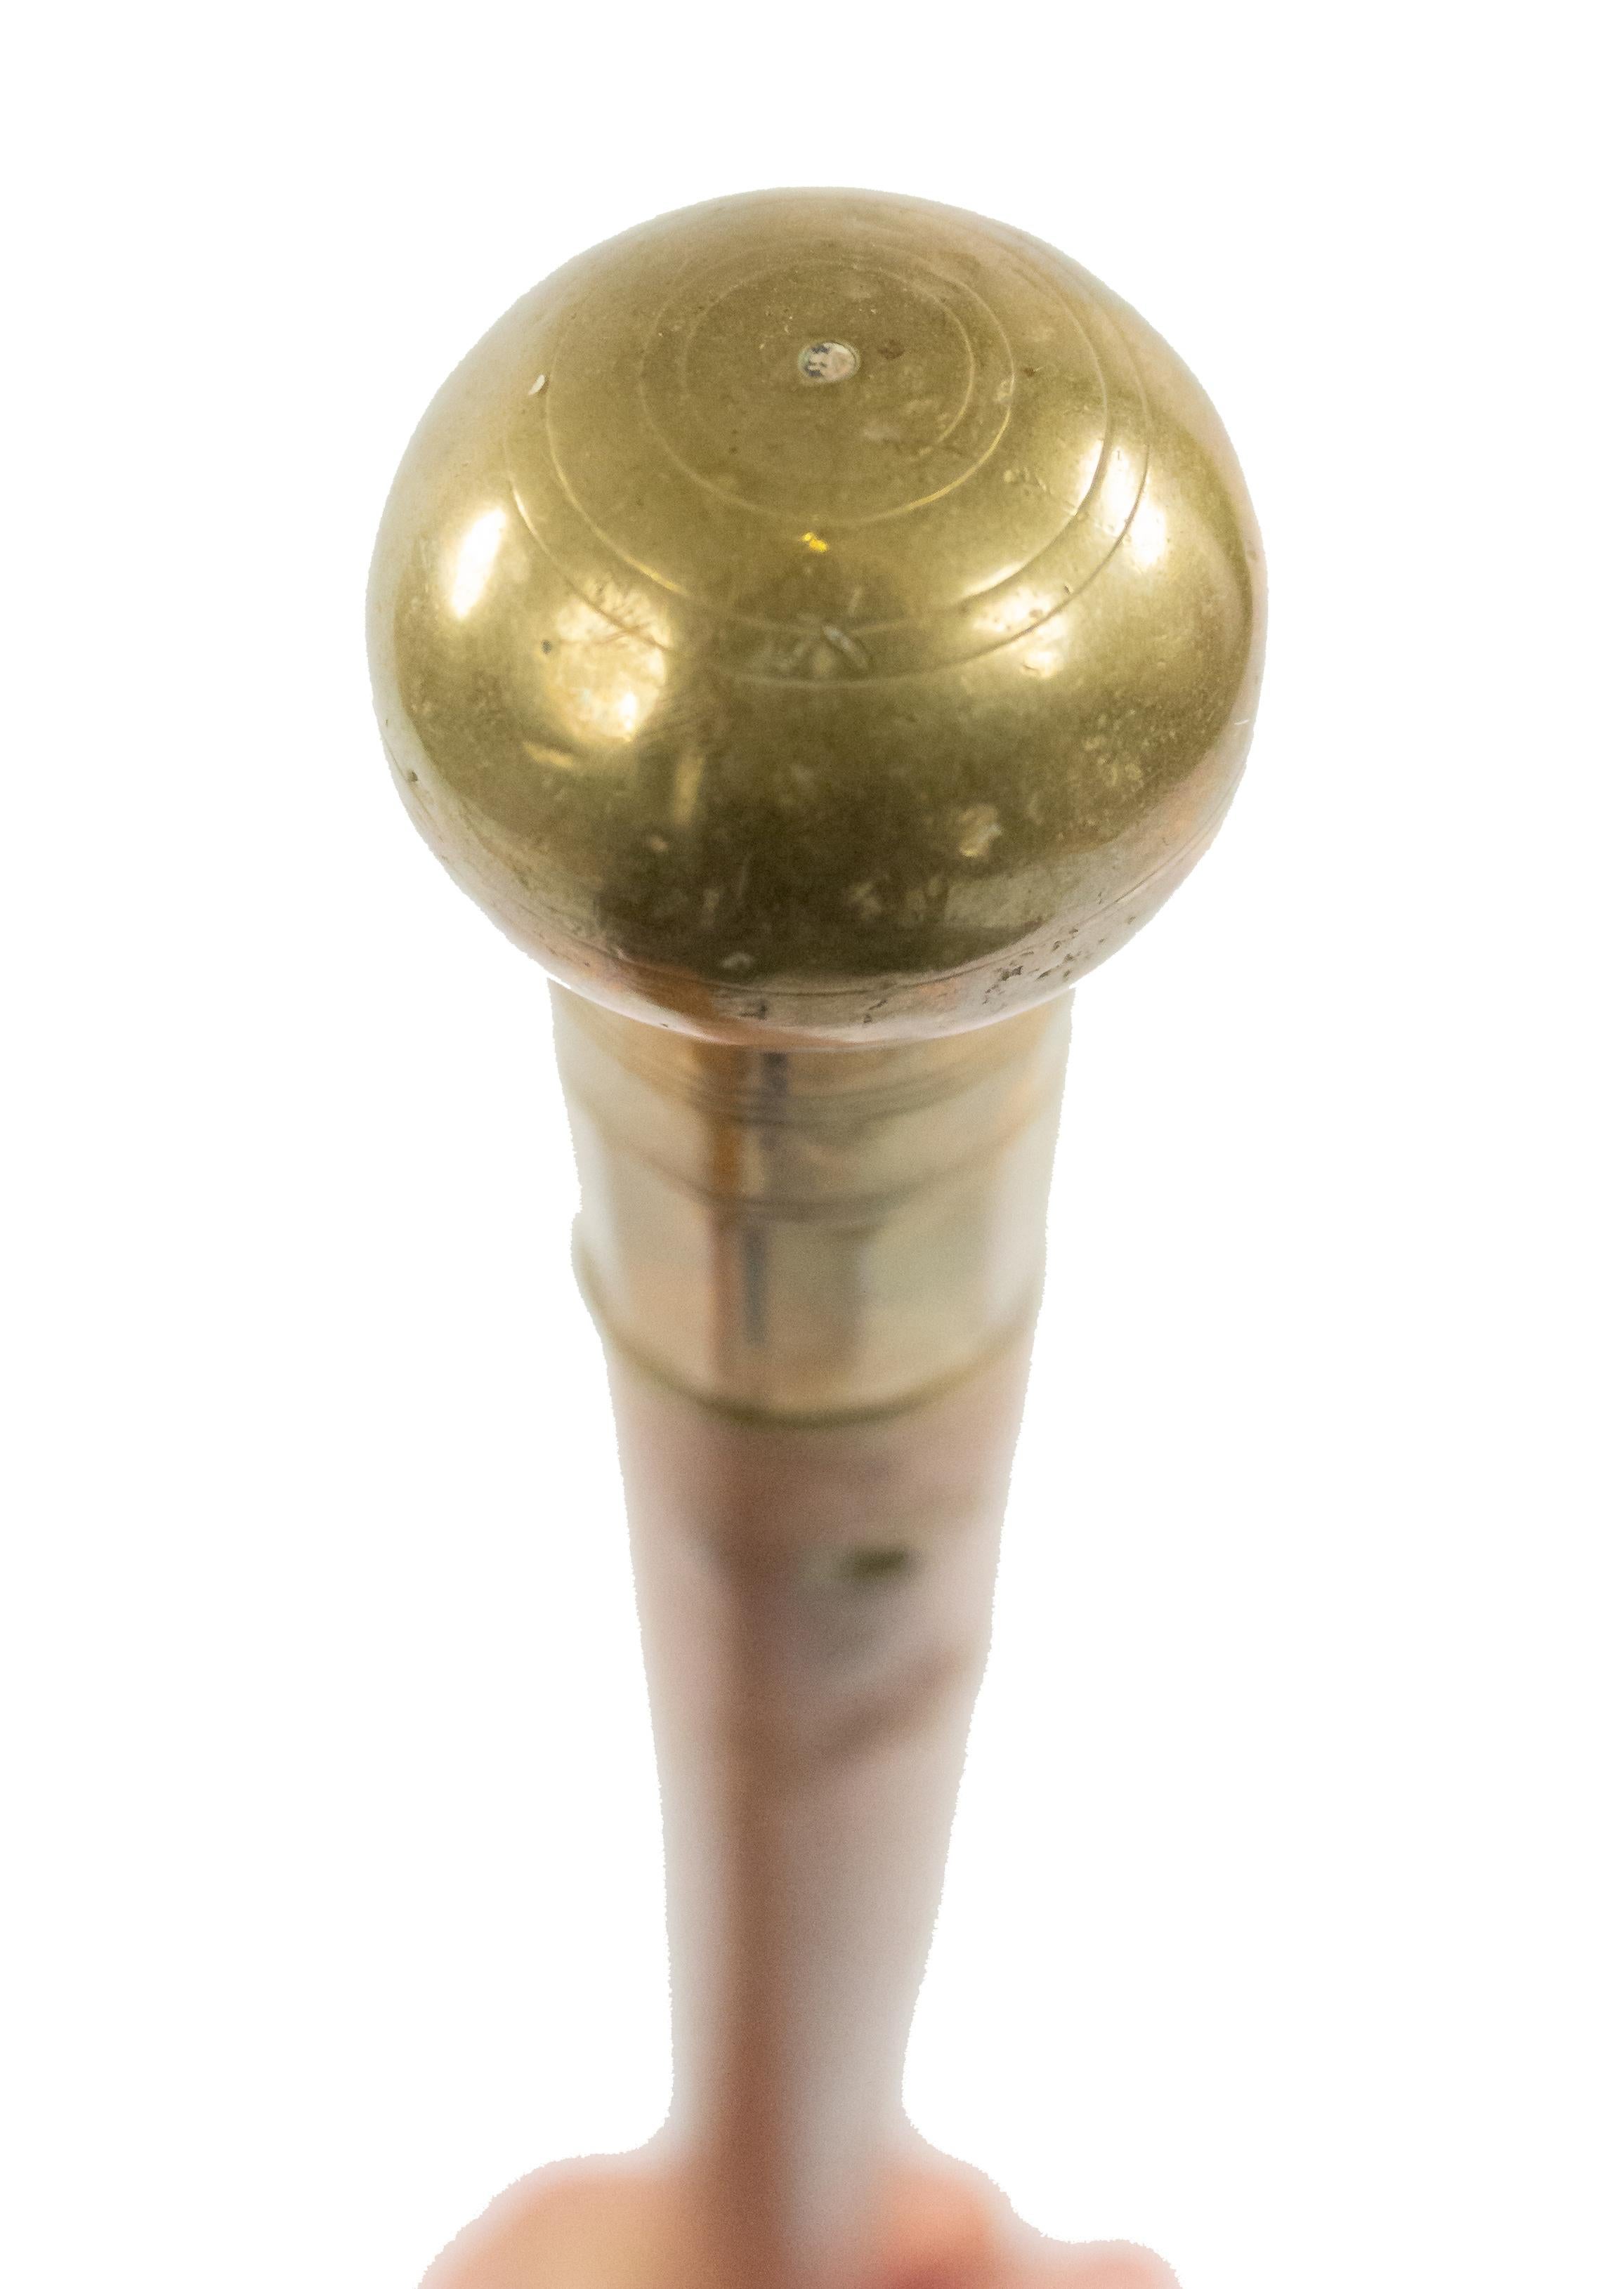 English Victorian light wood cane with brass ball top and fluted sleeve.
 